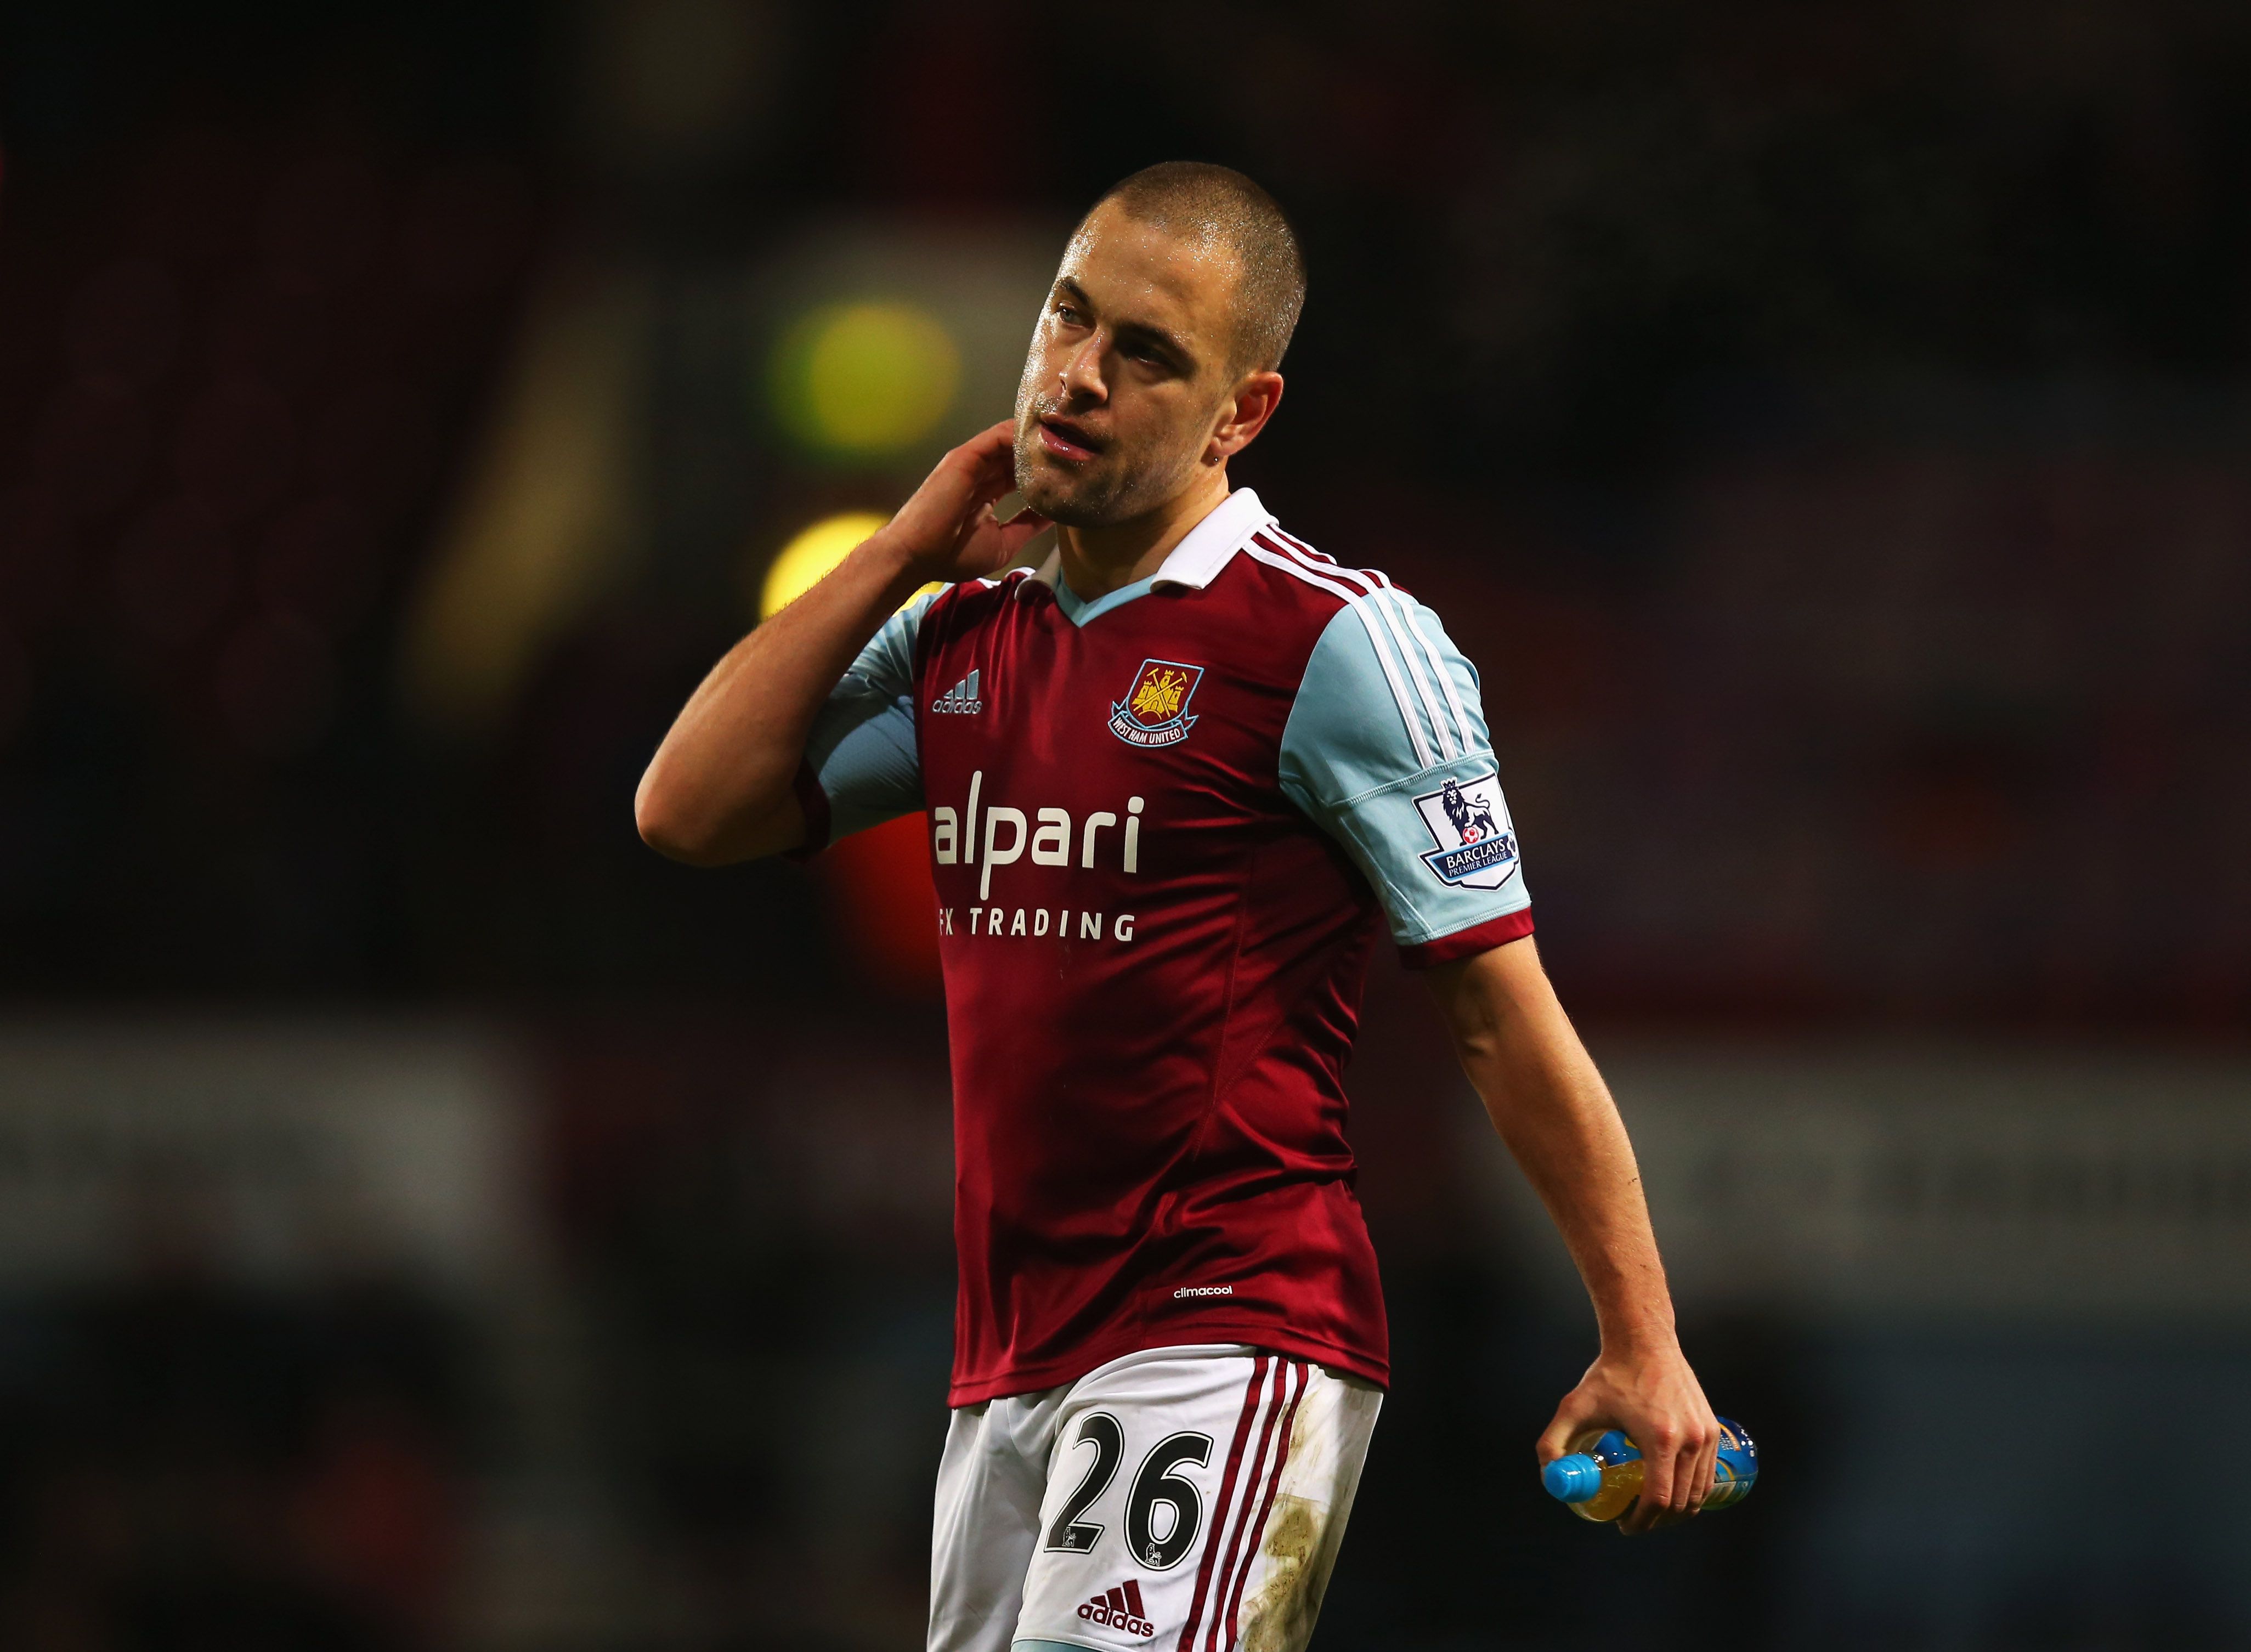 LONDON, ENGLAND - DECEMBER 26: Joe Cole of West Ham United looks dejected in defeat after the Barclays Premier League match between West Ham United and Arsenal at Boleyn Ground on December 26, 2013 in London, England. (Photo by Bryn Lennon/Getty Images)